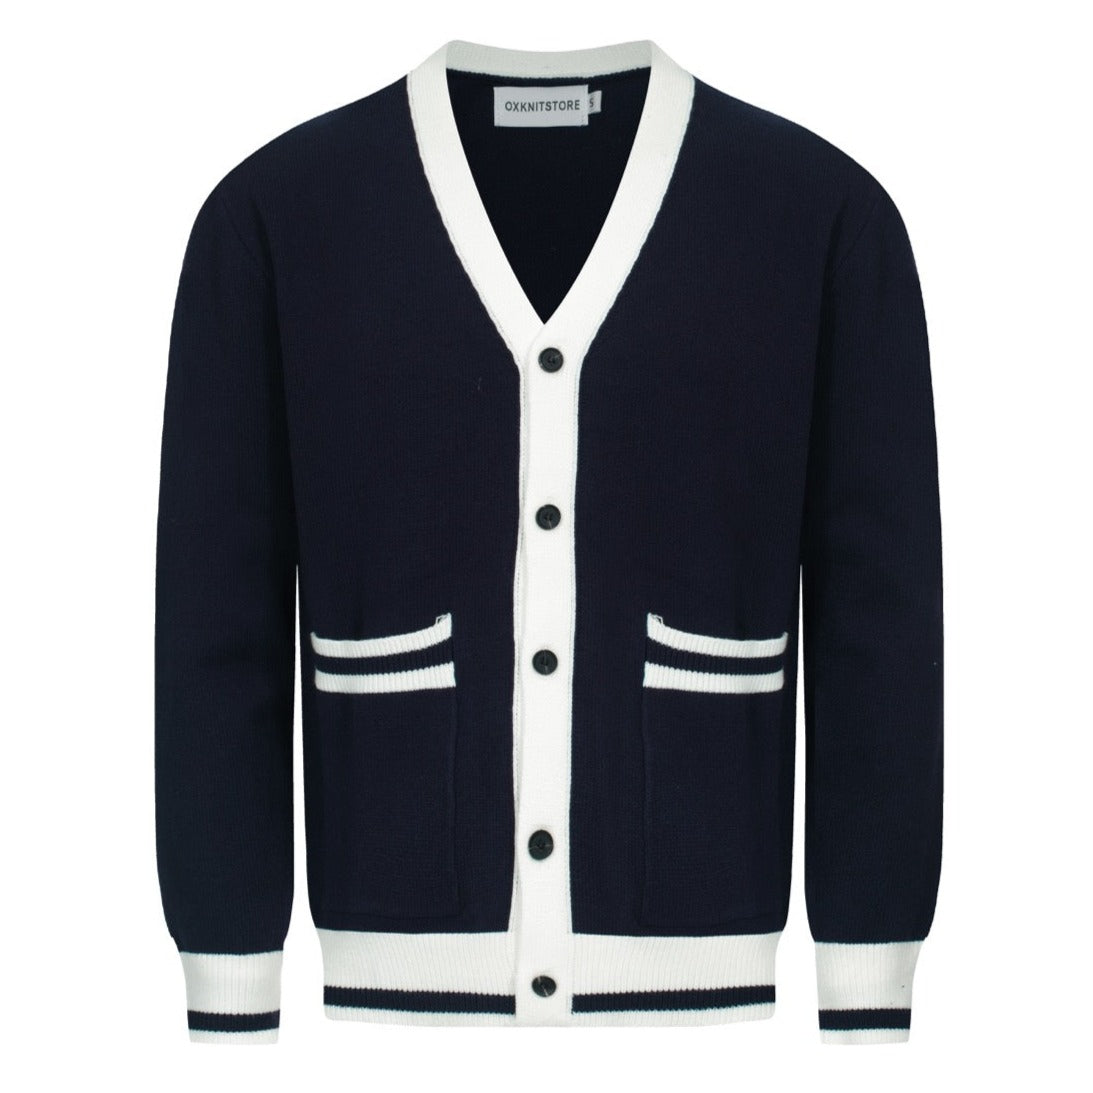 Men's Navy Blue Knitted Long Sleeves Cardigan With Double Pockets